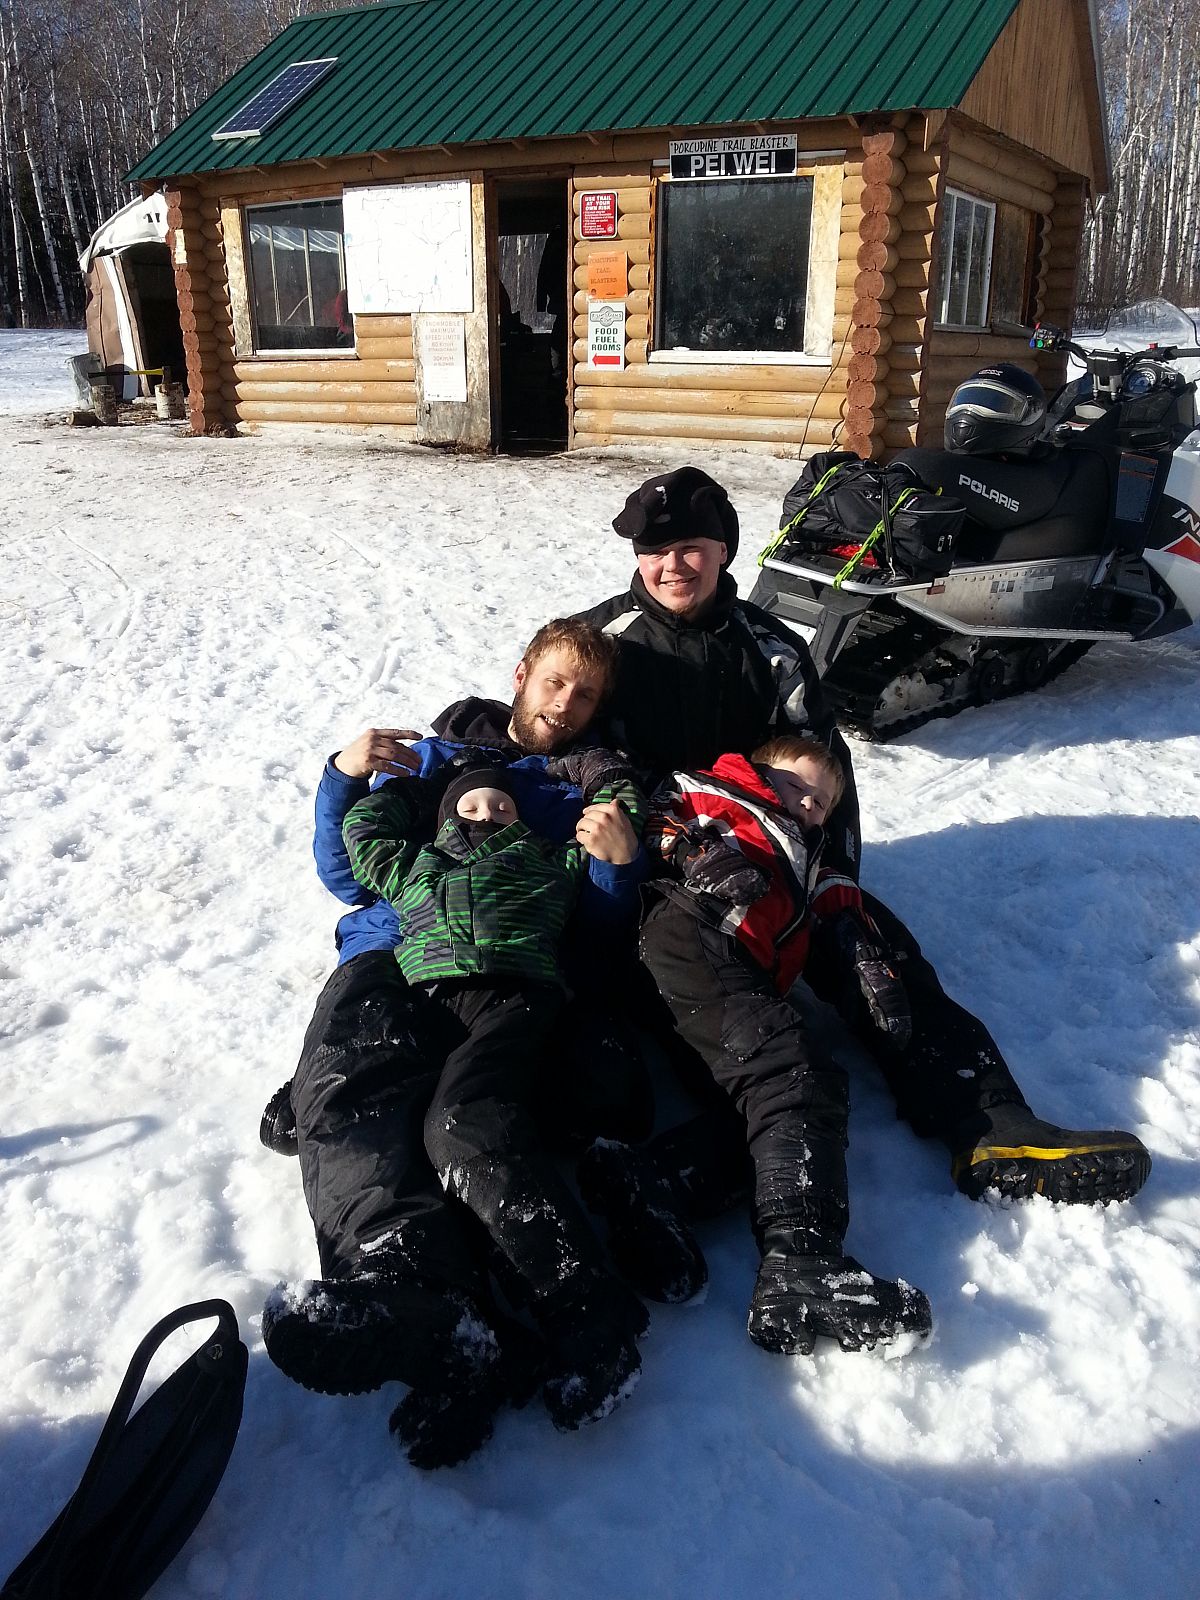 A warm February day to spend riding with Uncle and Dad!